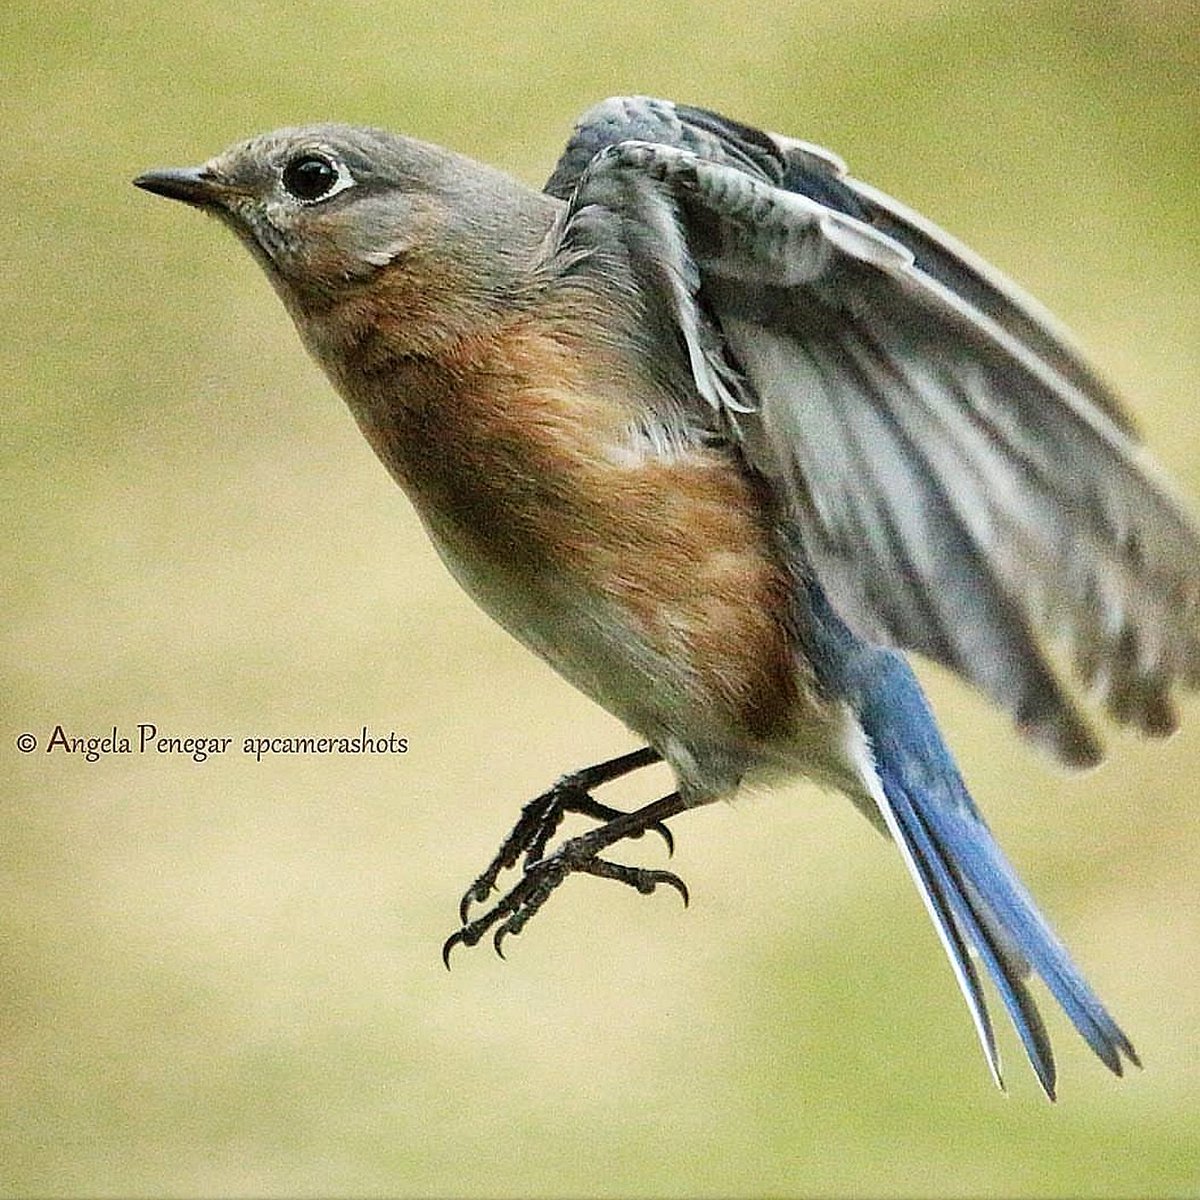 Hope all my #birdnerds are having a great #Thursdaymorning here's a #NC #bluebird beauty. One of my  #fav of the #featheredwingedfriends #nature #naturelovers #NaturePhotography  #Tweetups #birdsoftwitter #birdlove nice weather here #inthecarolinas